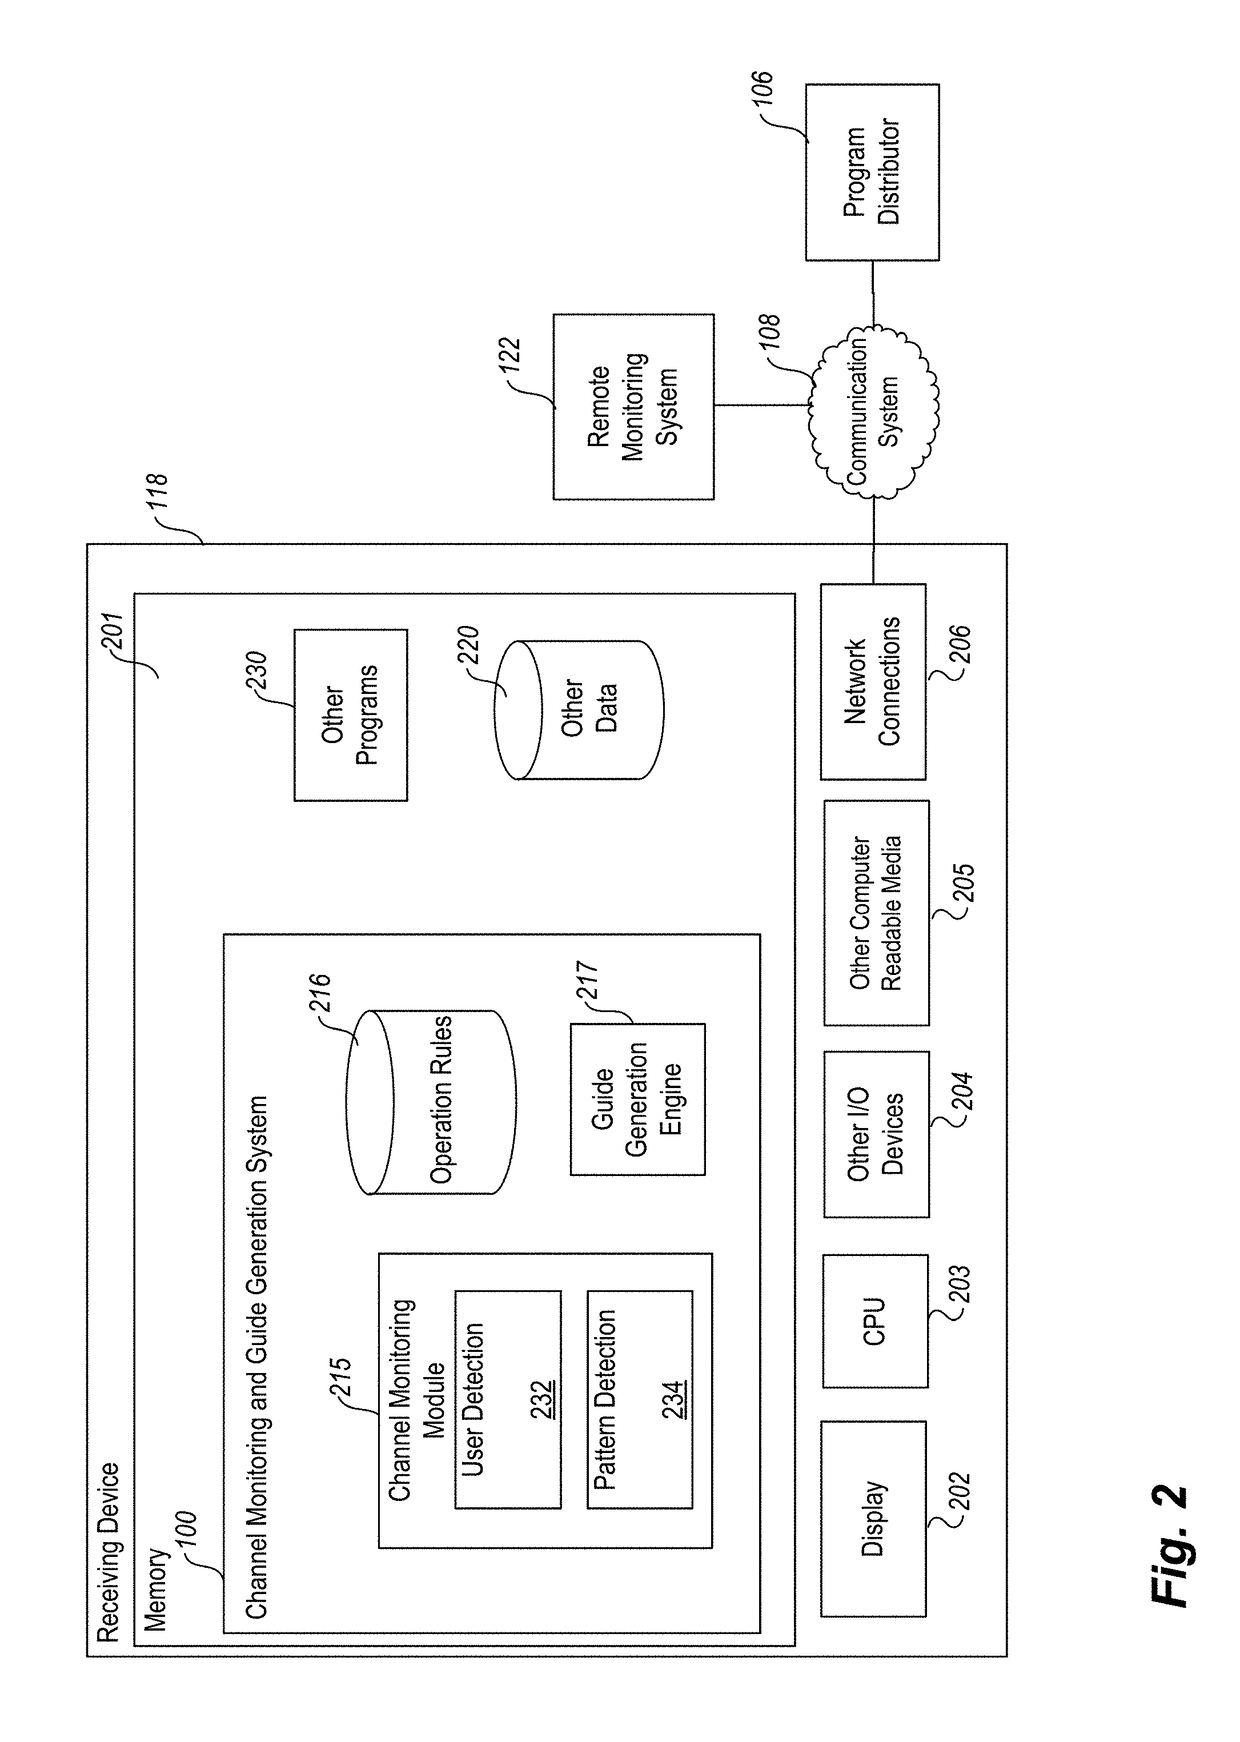 Systems and methods for an adaptive electronic program guide